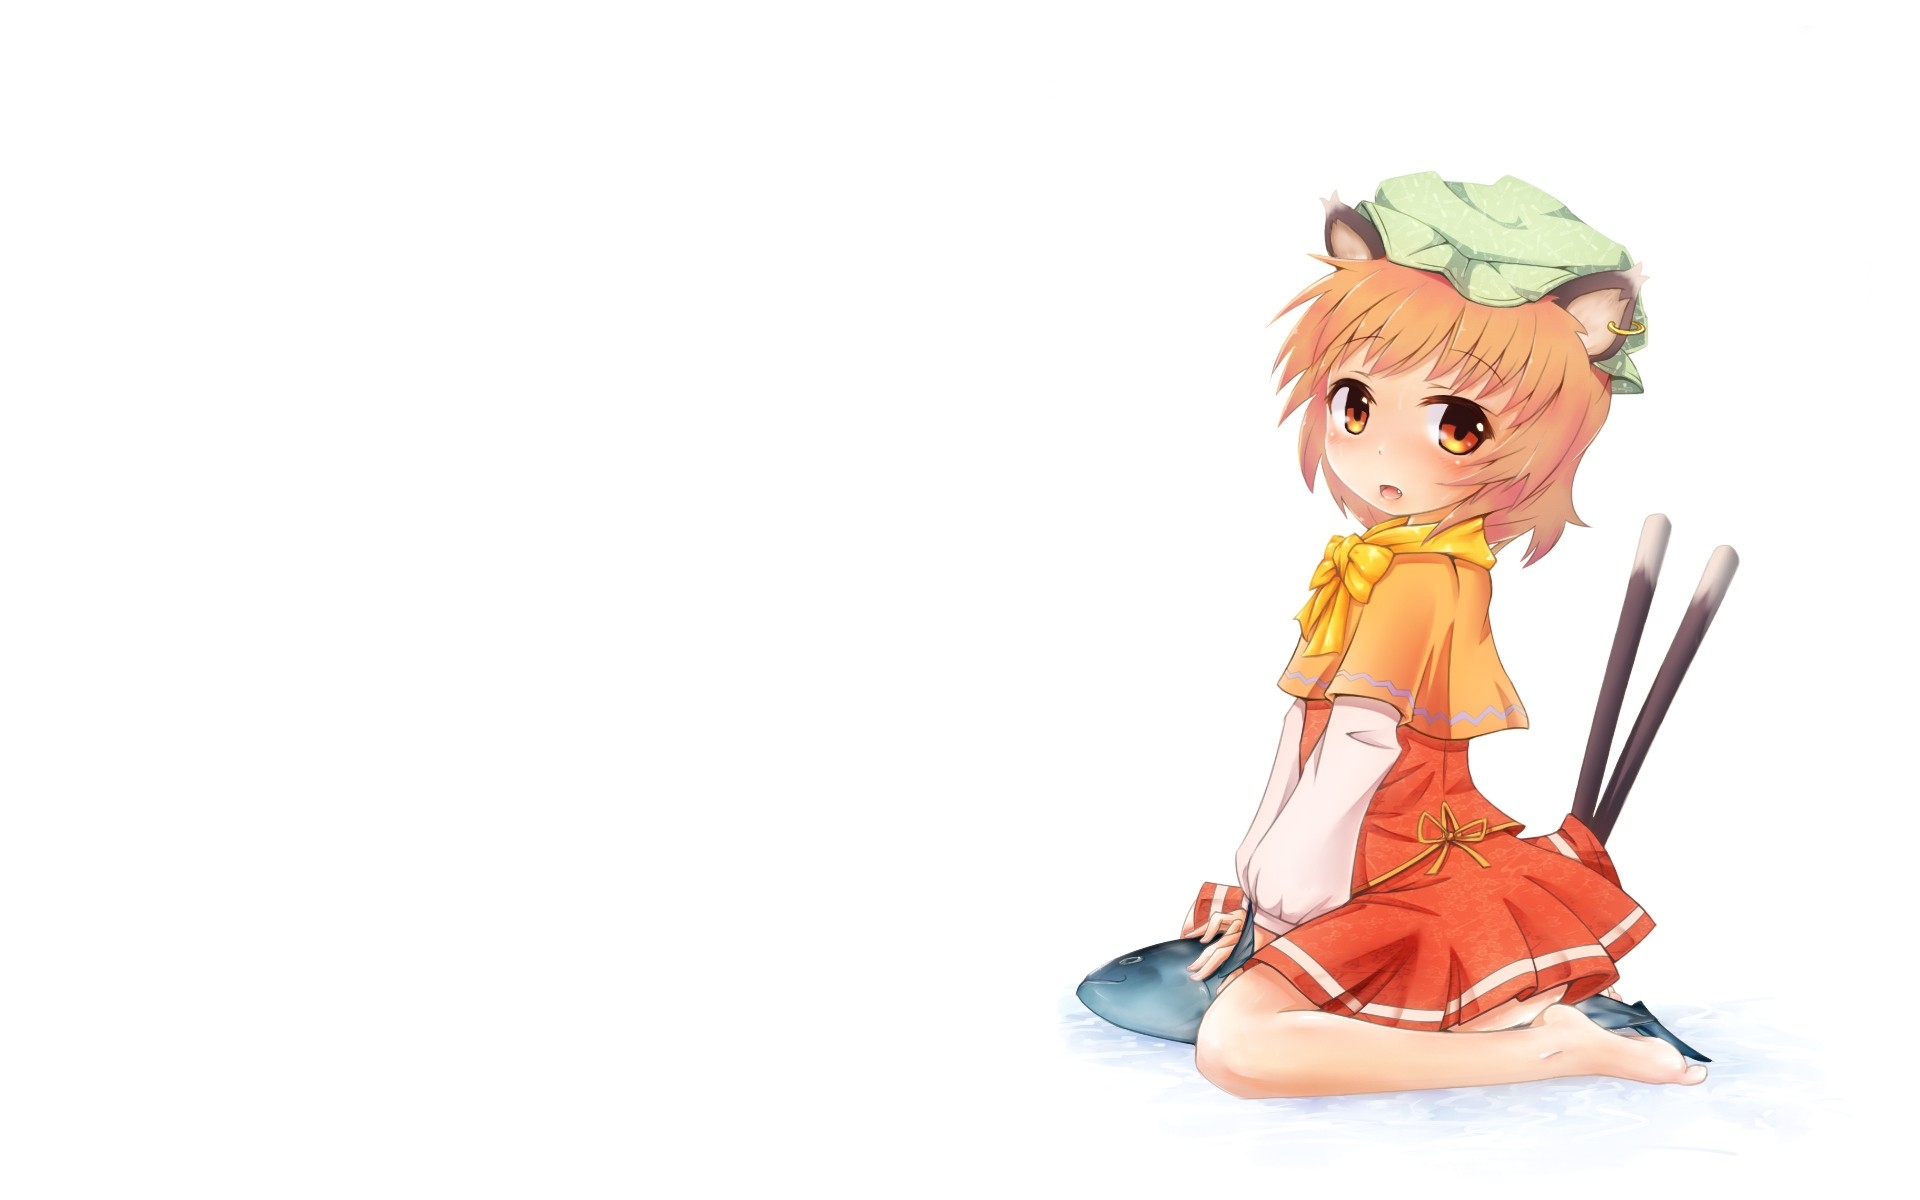 tails touhou brown animal ears red eyes short hair chen hats anime girls 1920x1200 wallpaper High Quality Wallpaper, High Definition Wallpaper